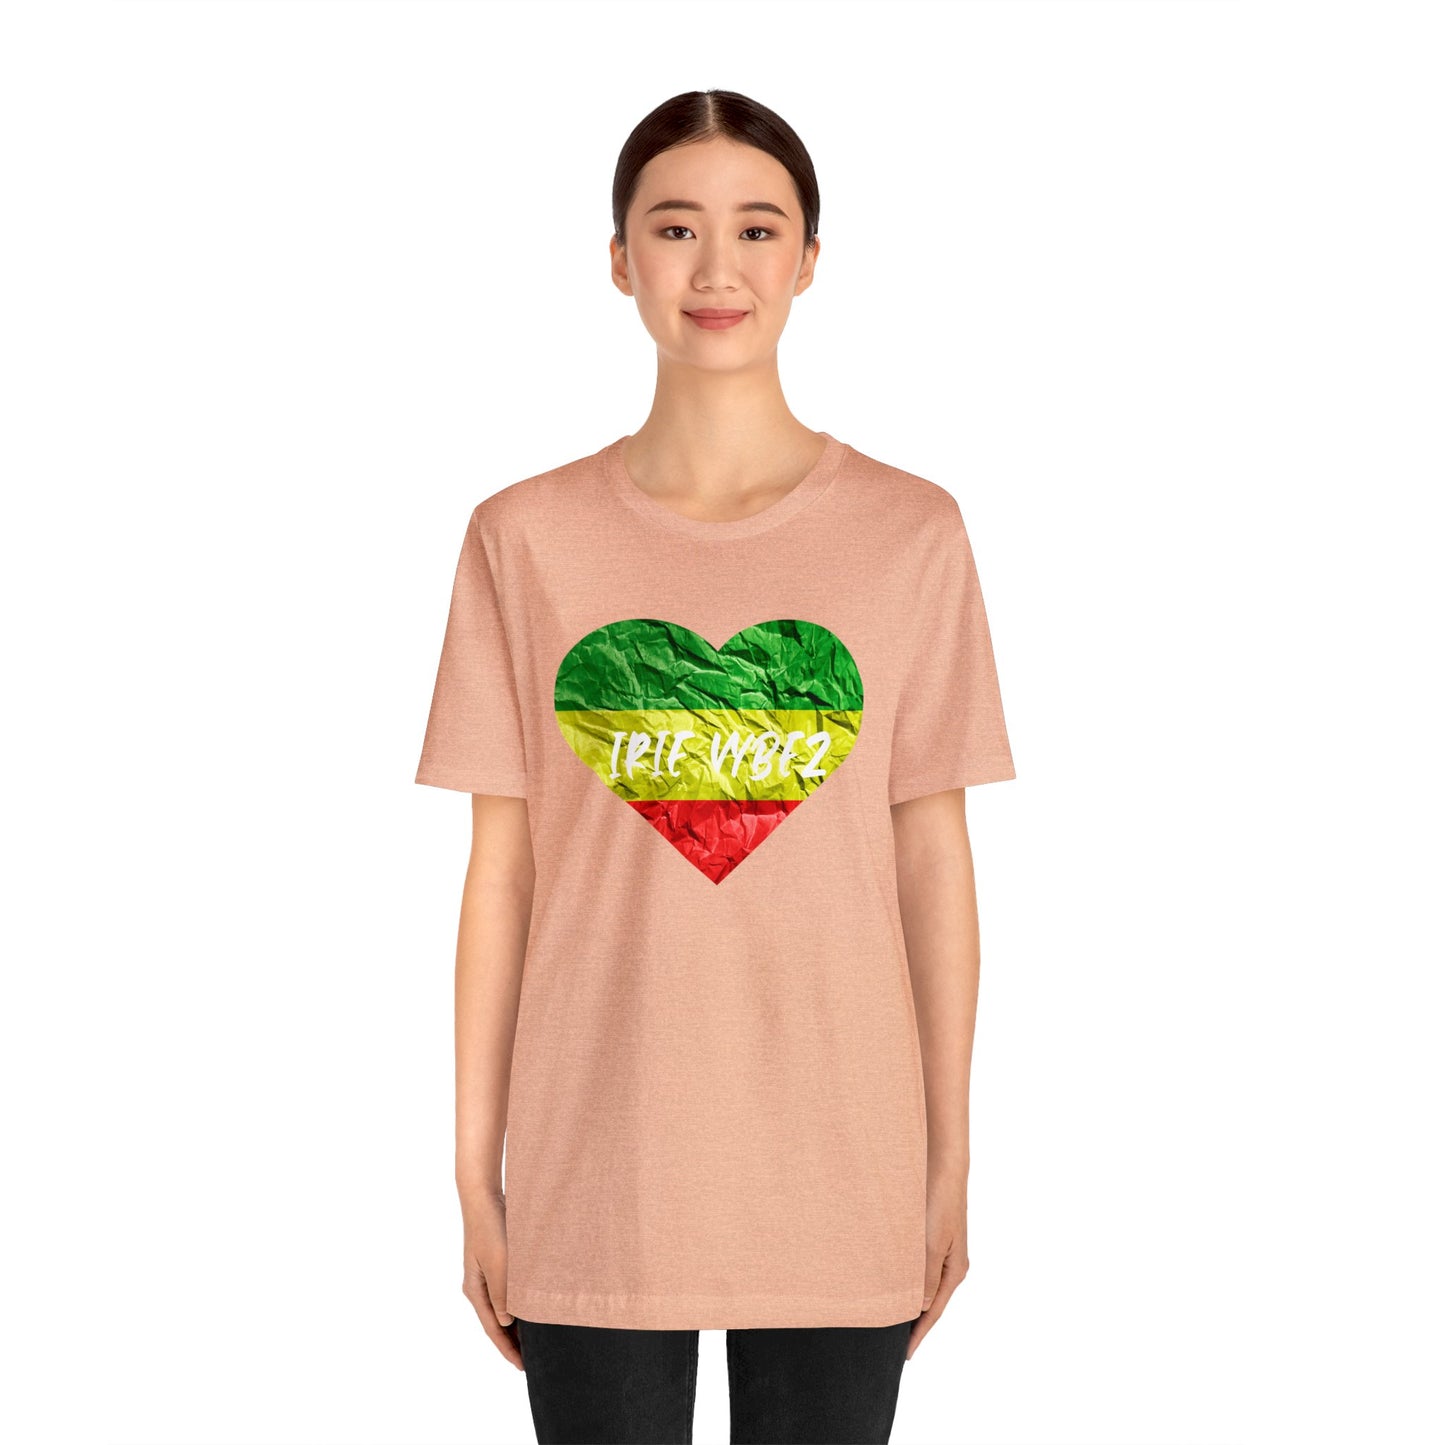 RED GREEN AND GOLD IRIE VYBE CREWNECK T SHIRT